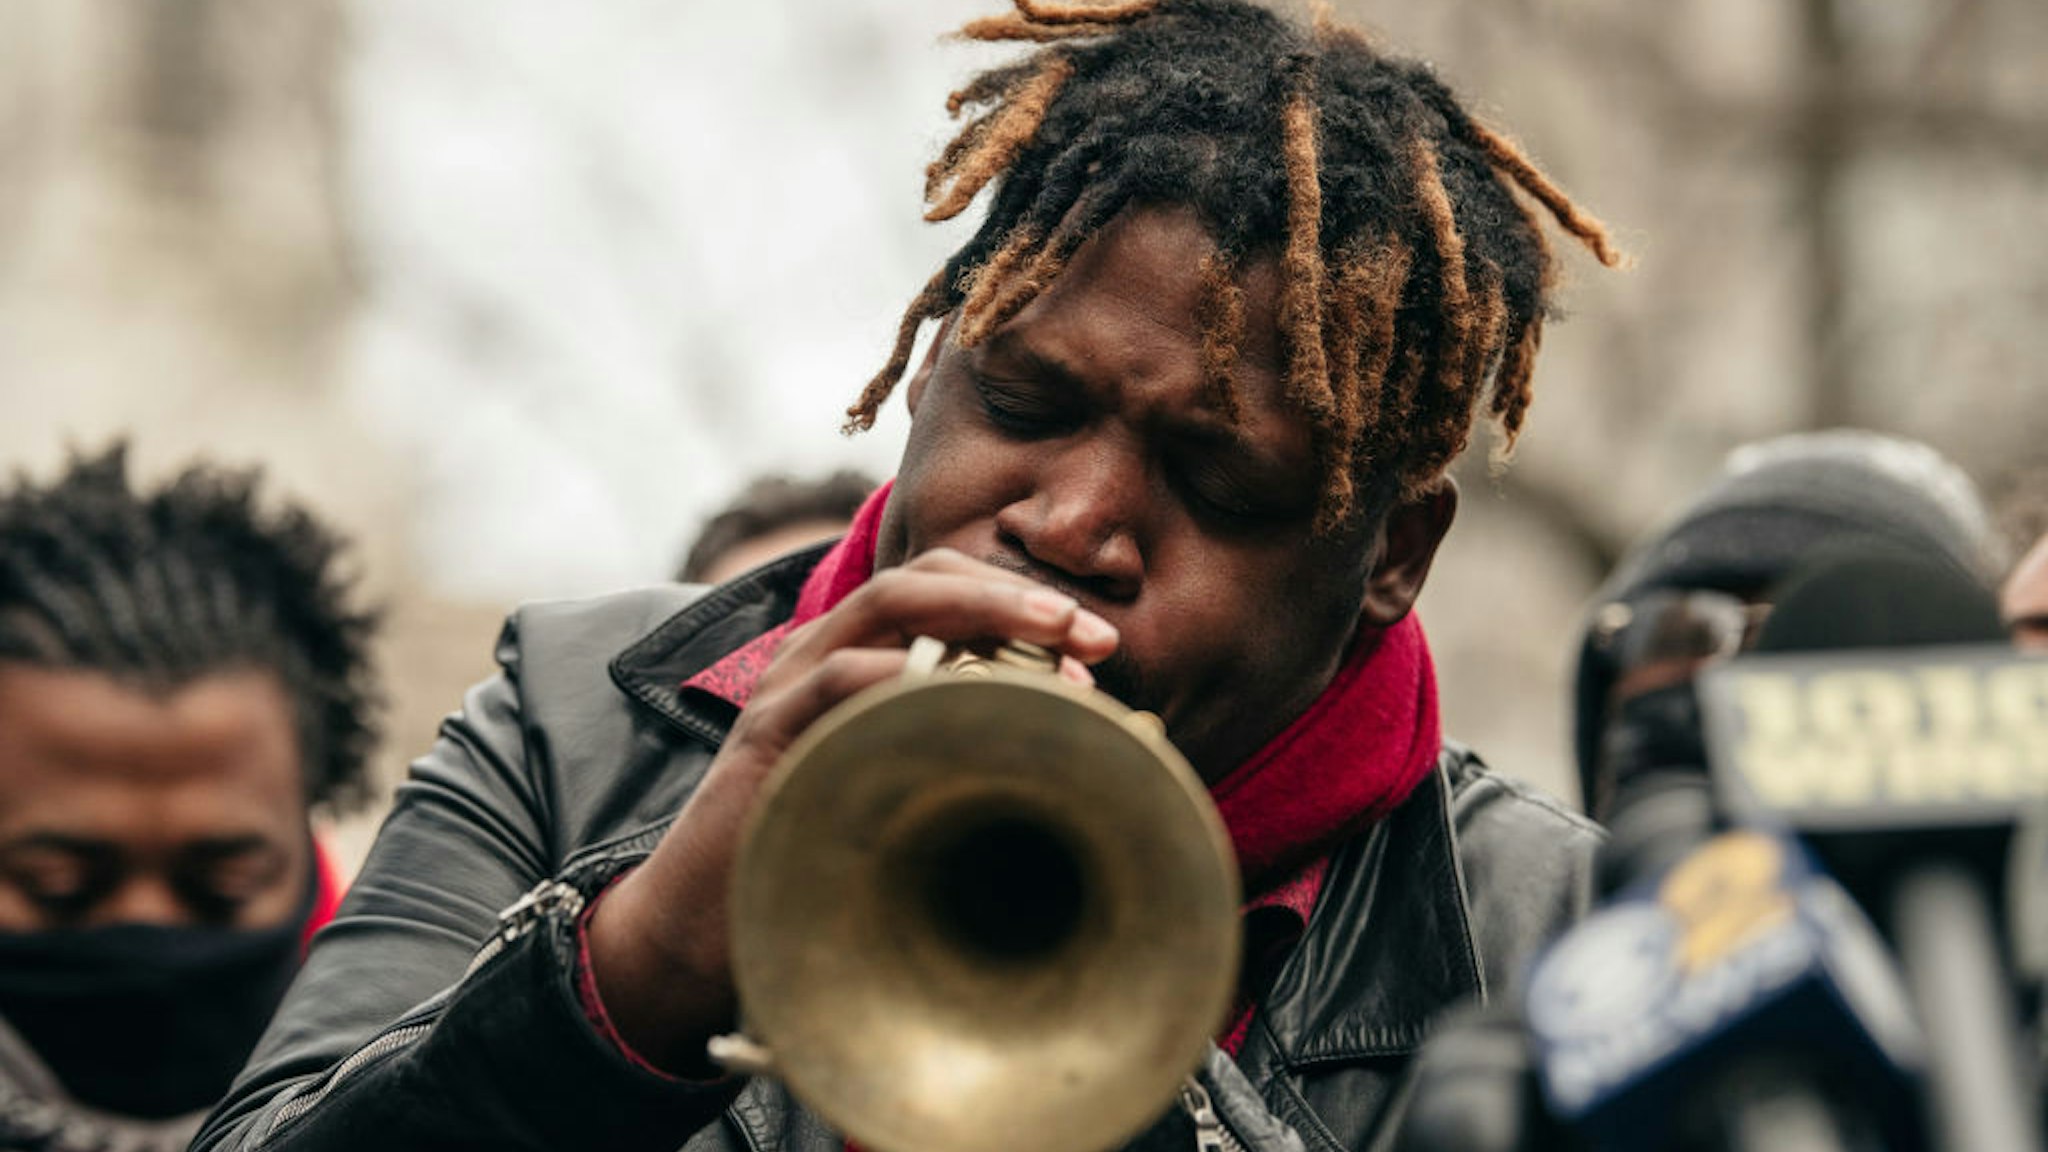 Jazz musician Keyon Harrold plays trumpet at a press conference held in lower Manhattan on December 30, 2020 in New York City.